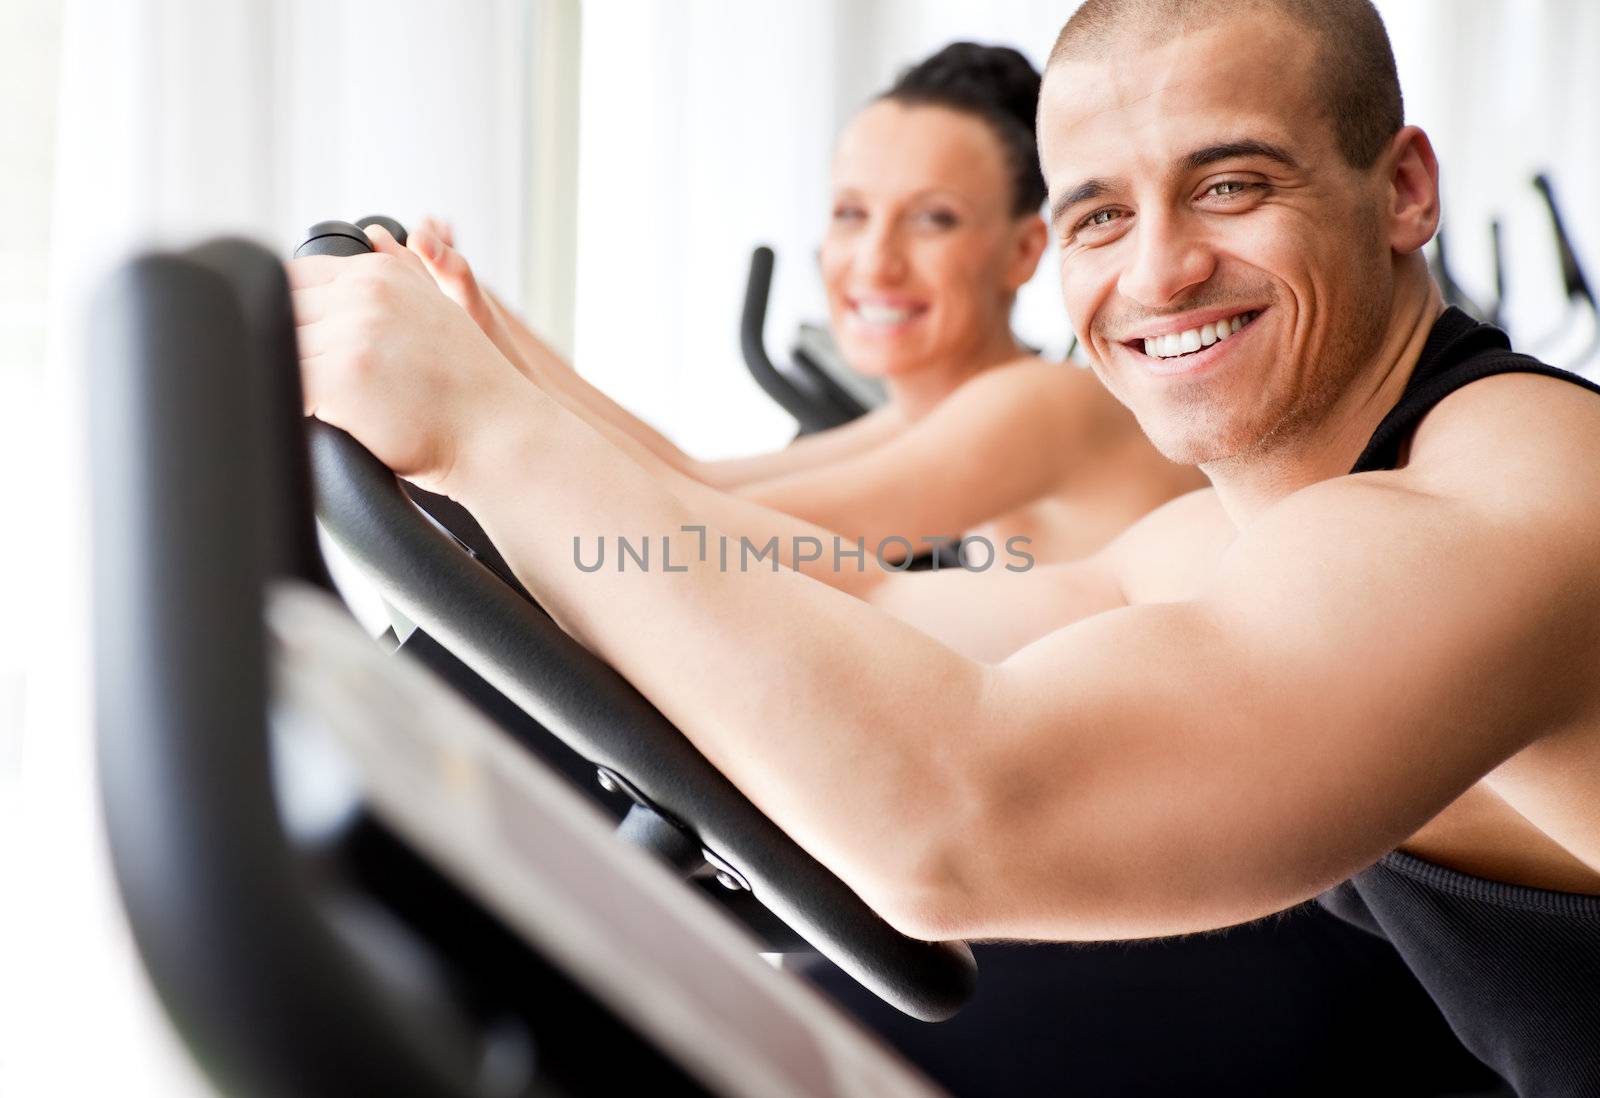 Athletic couple working out at the gym, male on focus